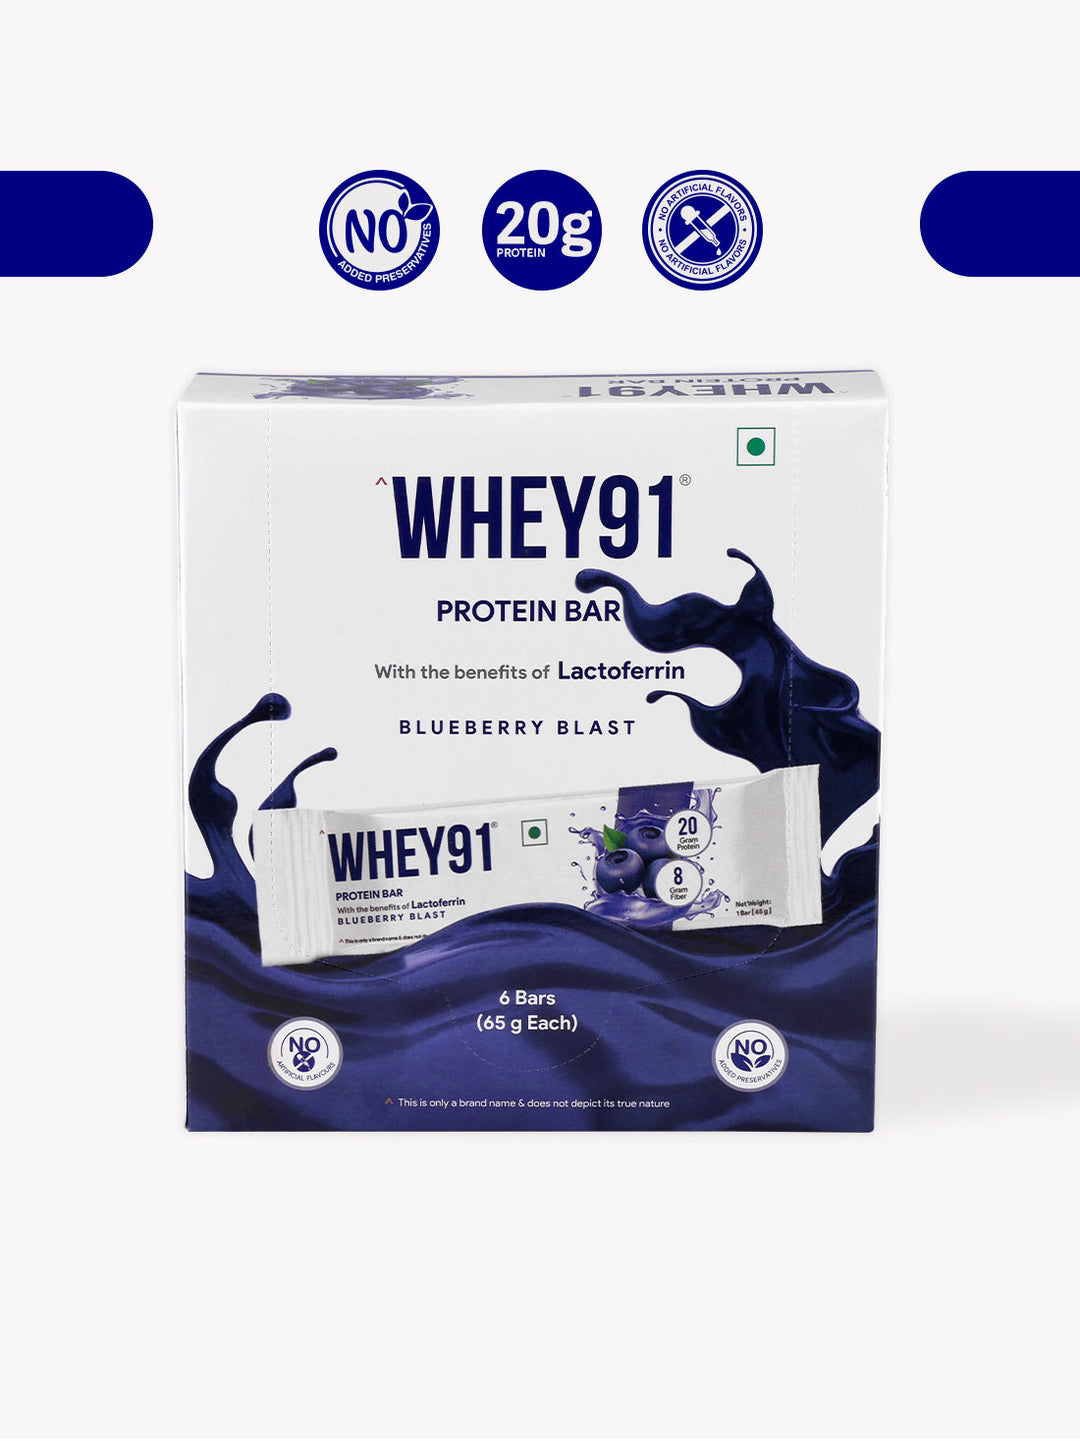 Whey91 Pack of 6 Protein Bar